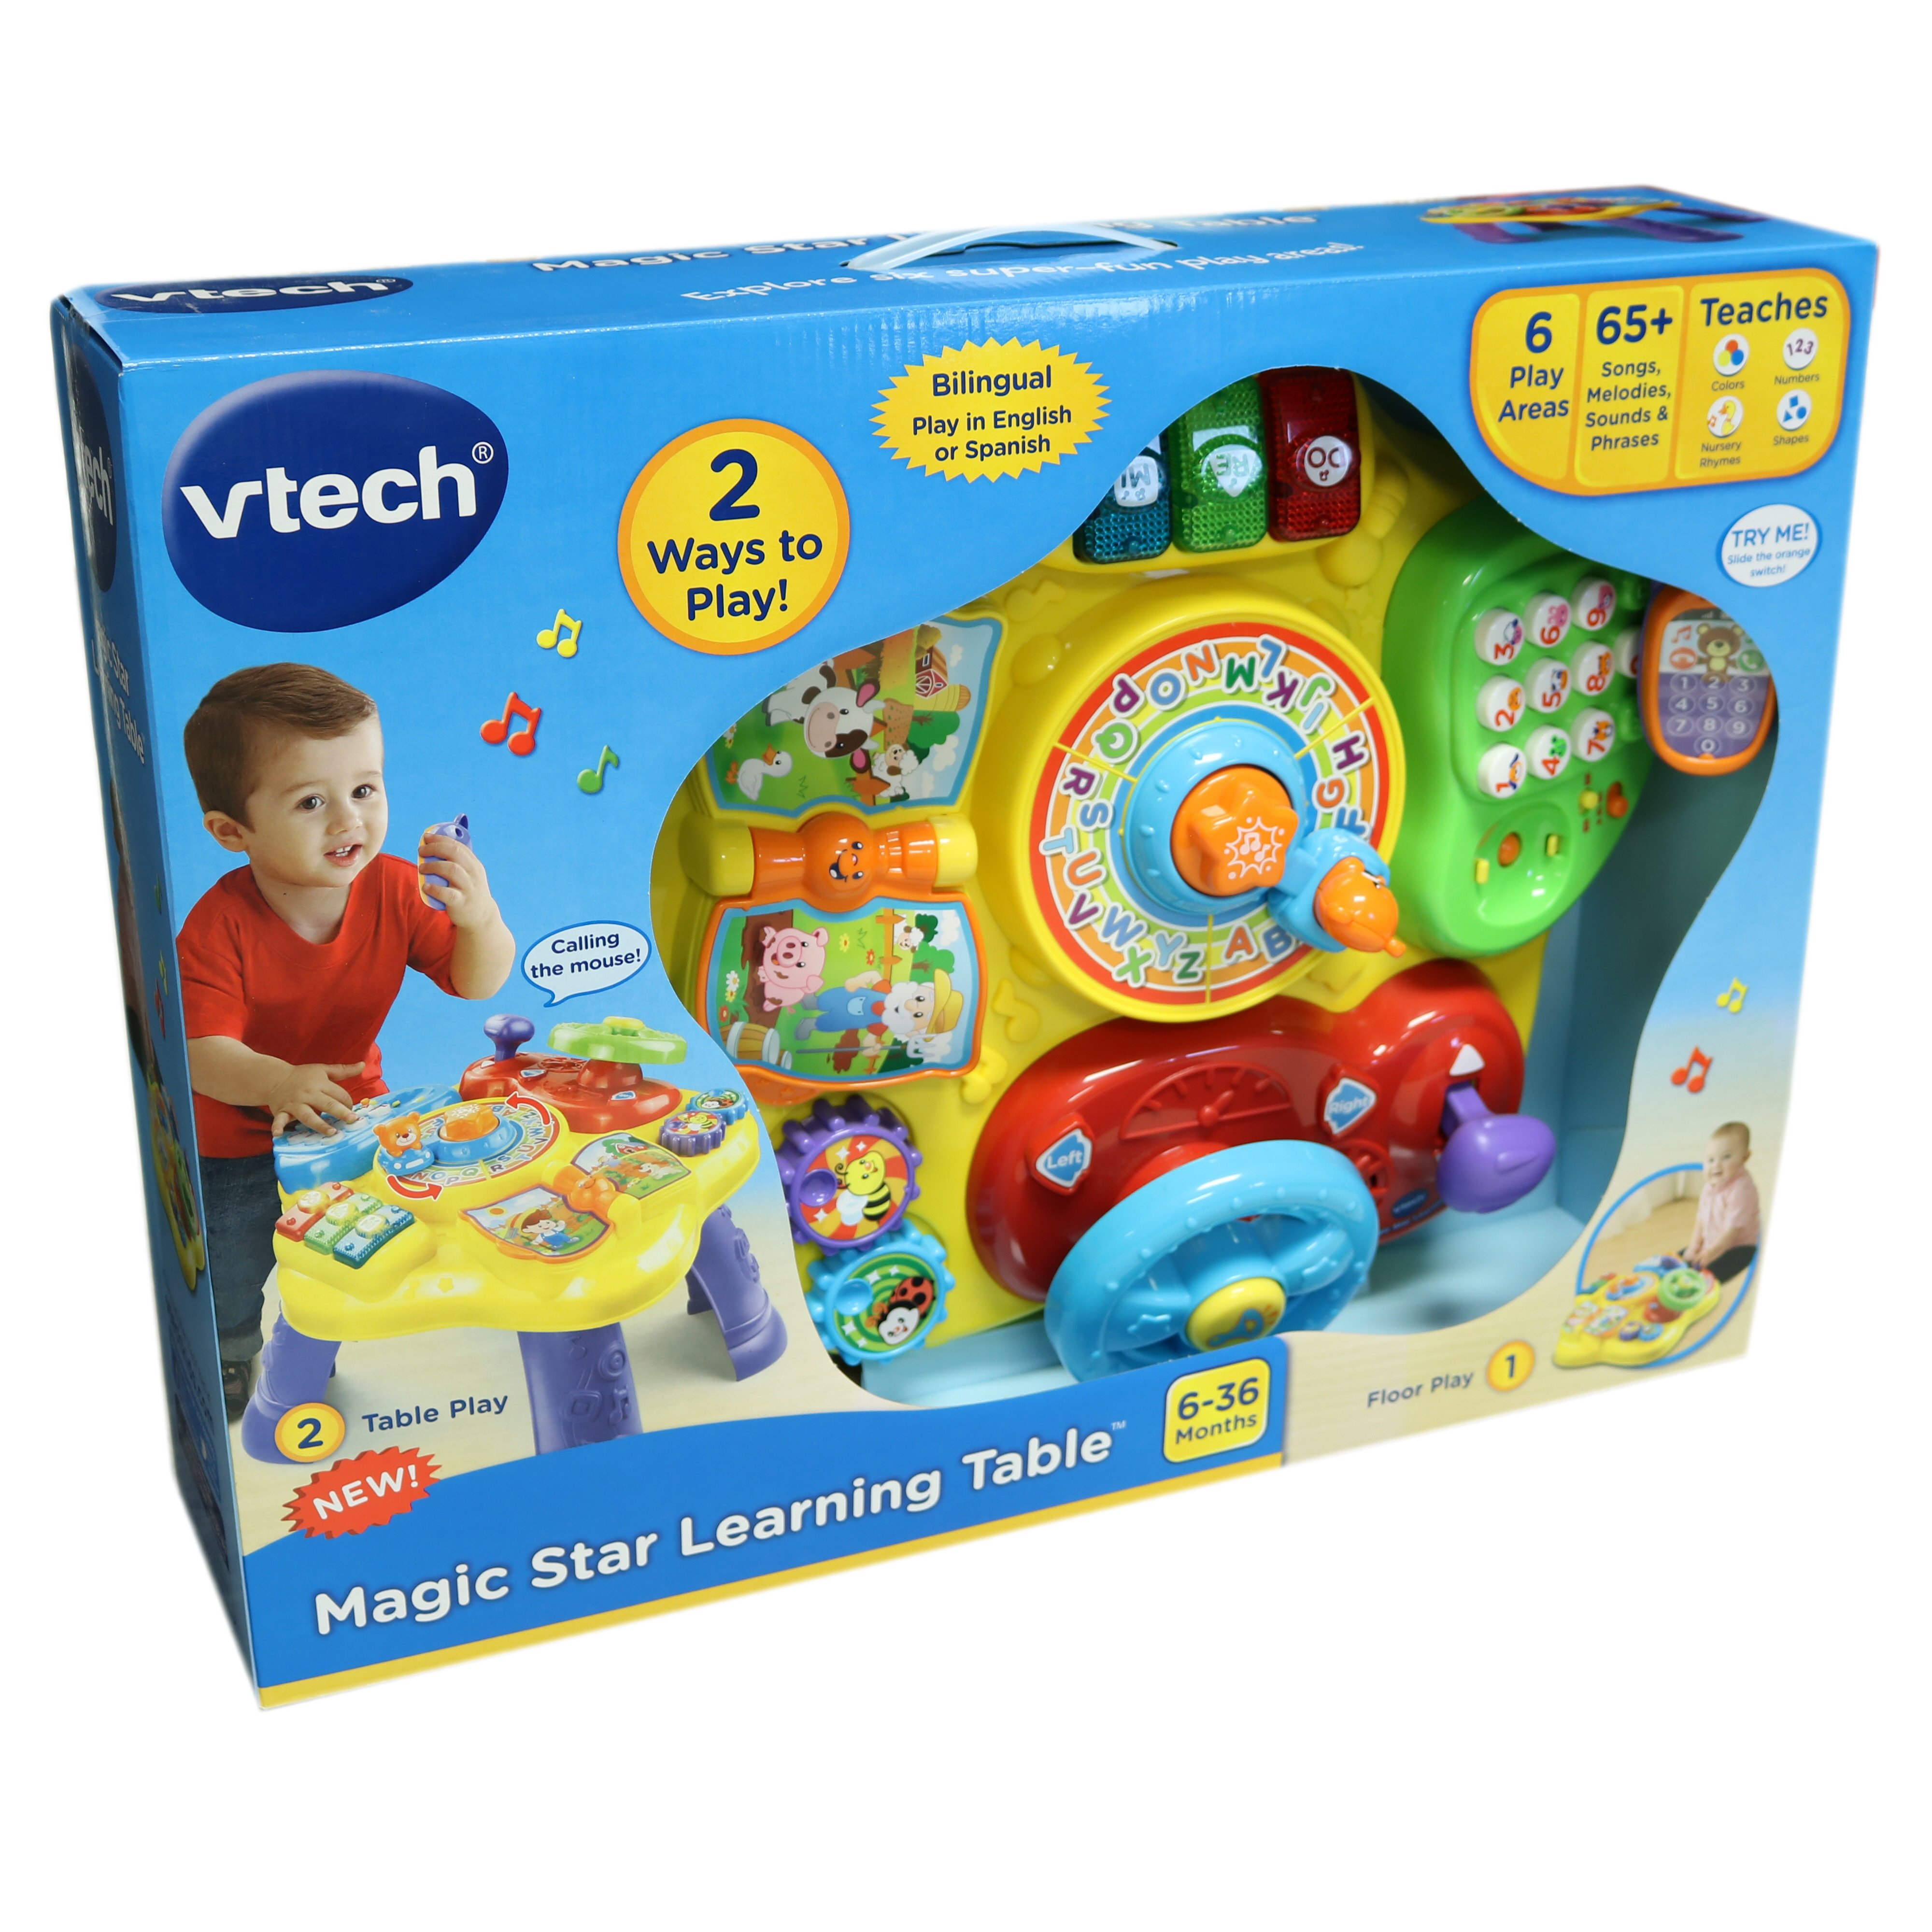 vtech play and learn table